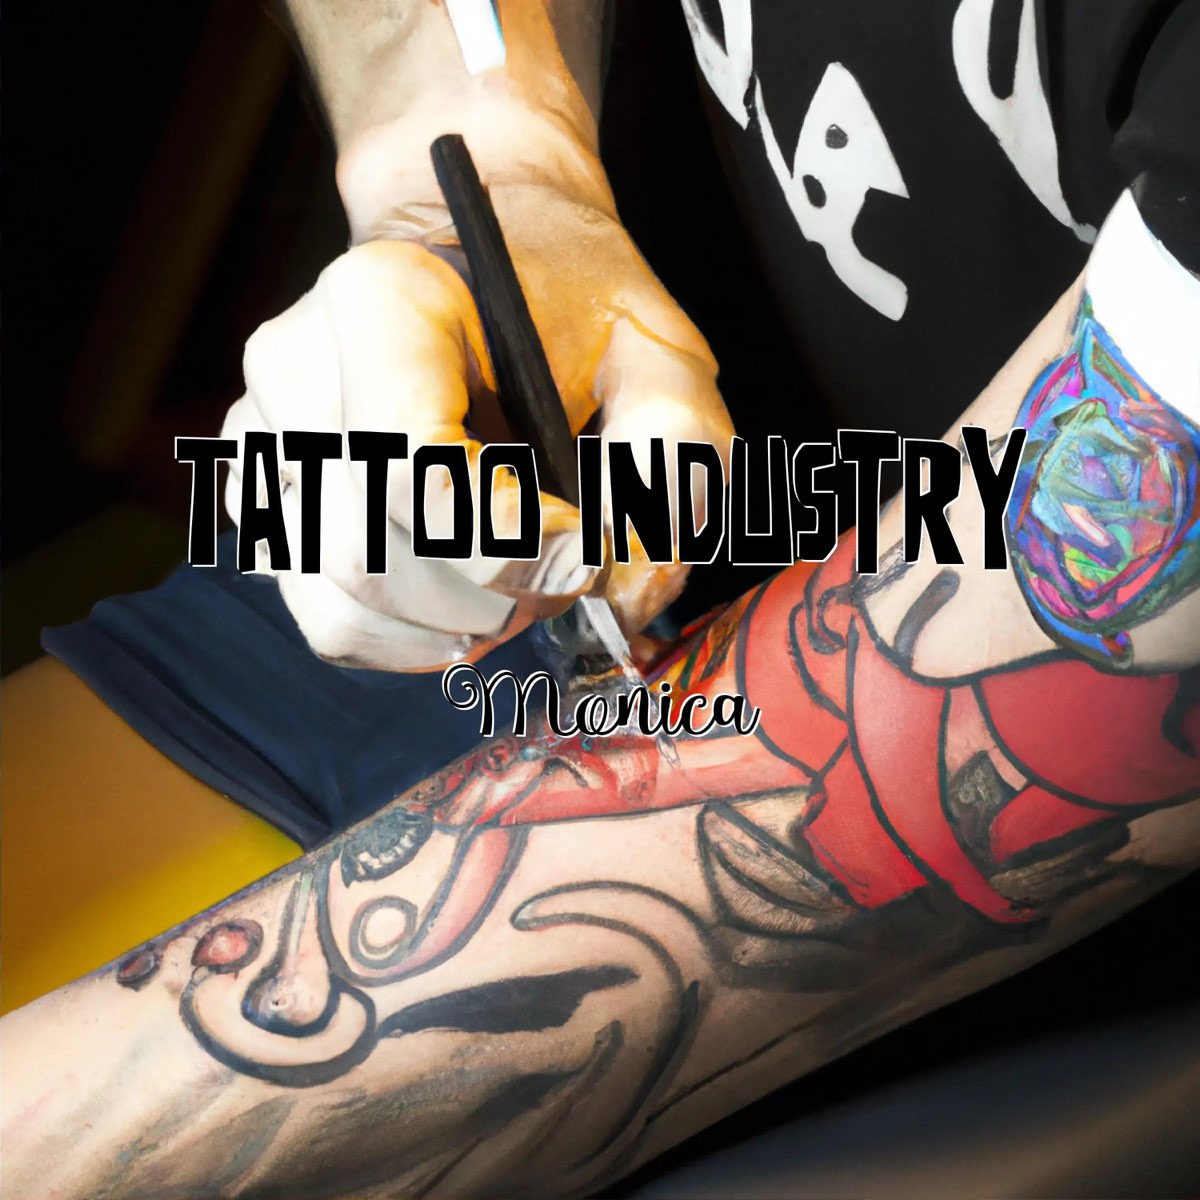 Industrial Tattoo 2 by 0-FRACTION on DeviantArt